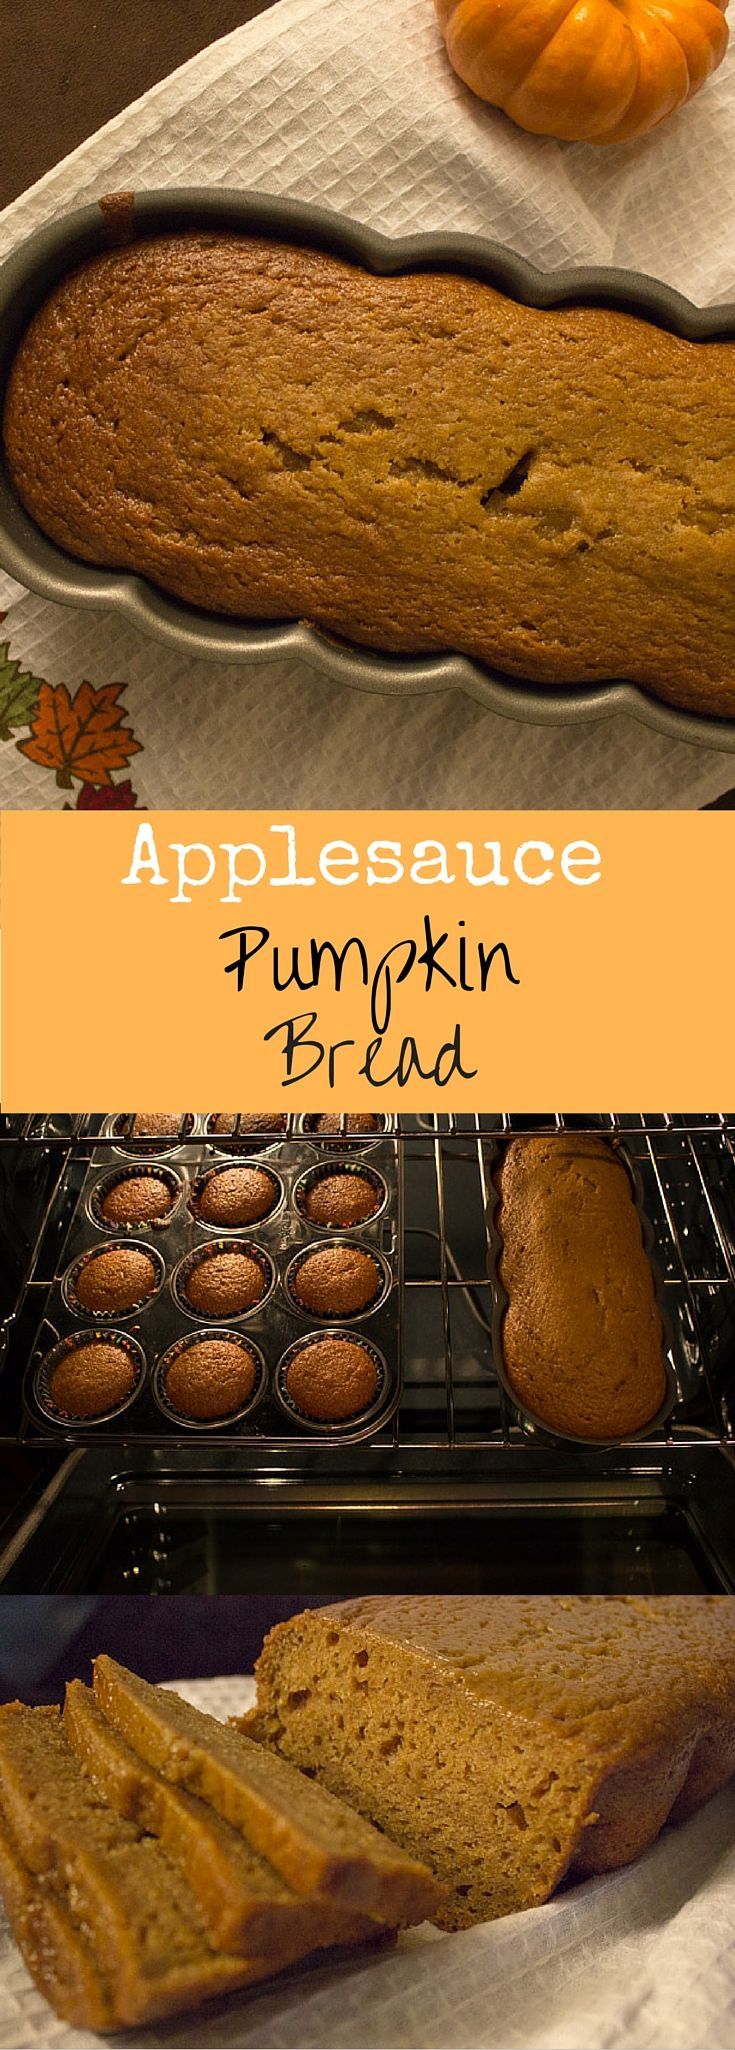 Pumpkin bread made a little healthier with applesauce instead of oil! The perfect